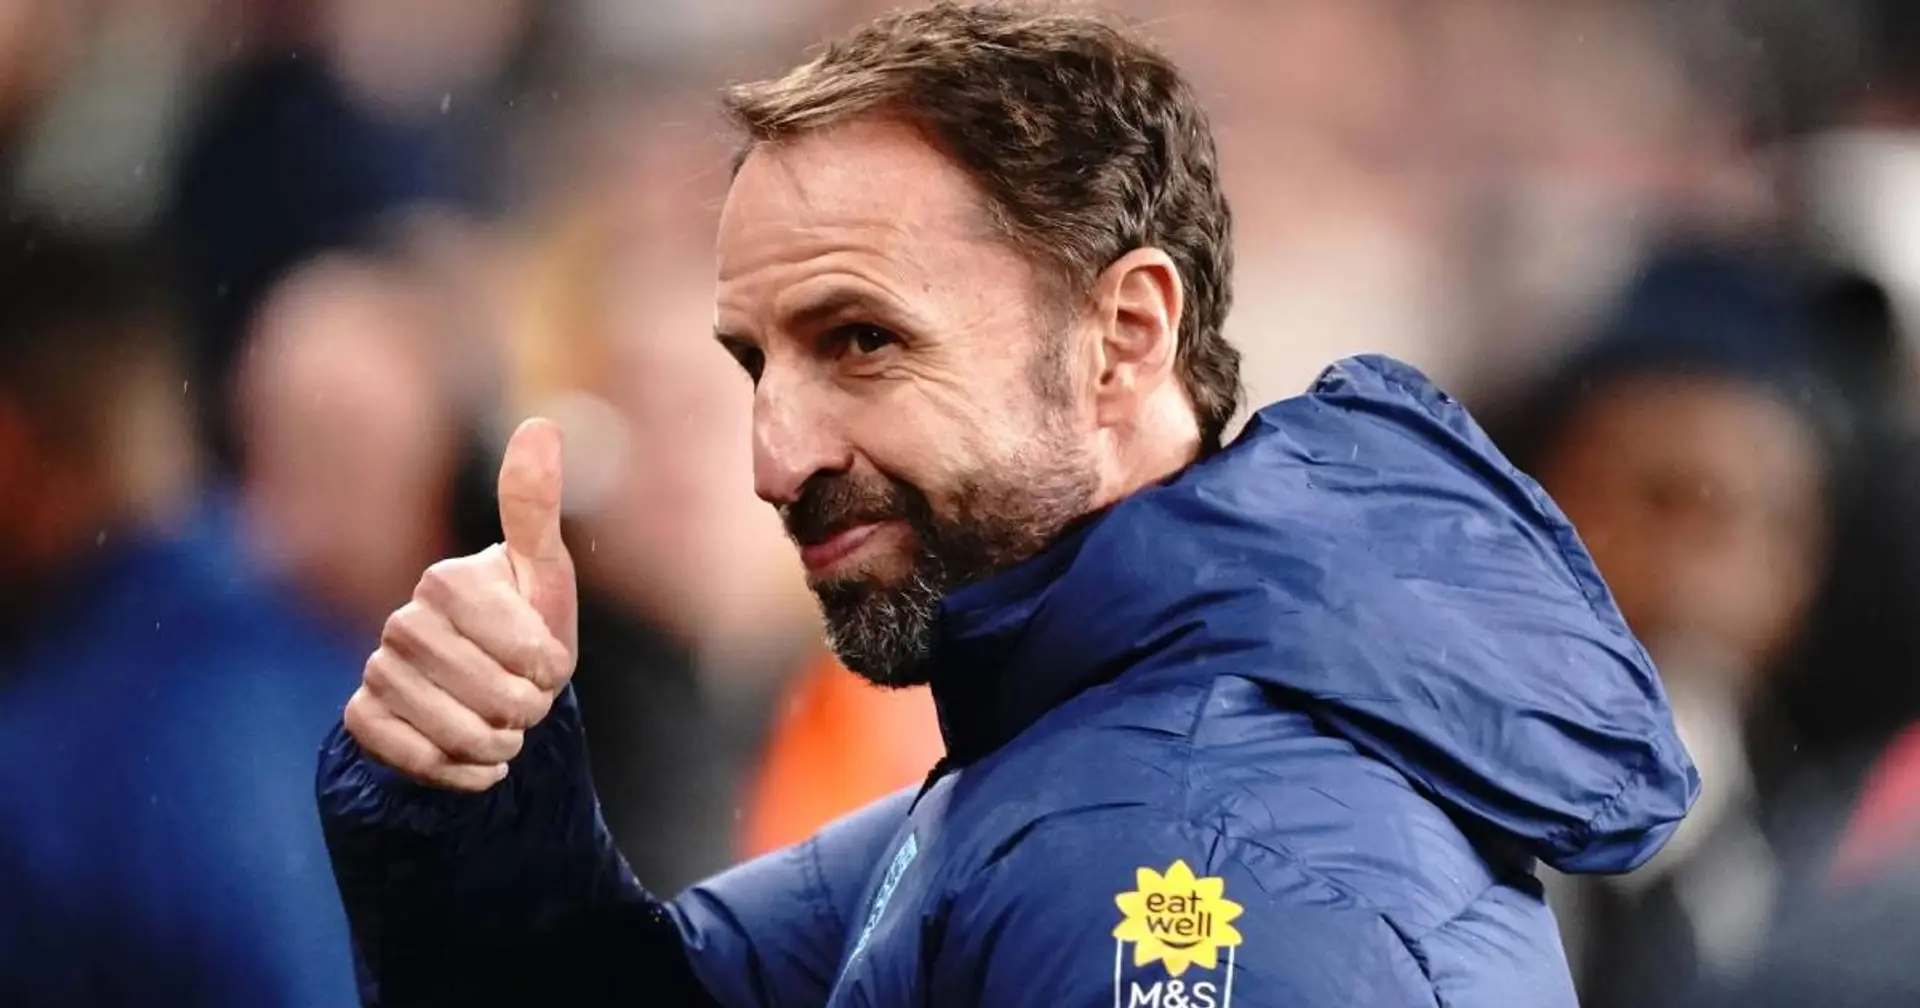 Gareth Southgate receives 'boost' as Man United won't appoint next manager based on trophies